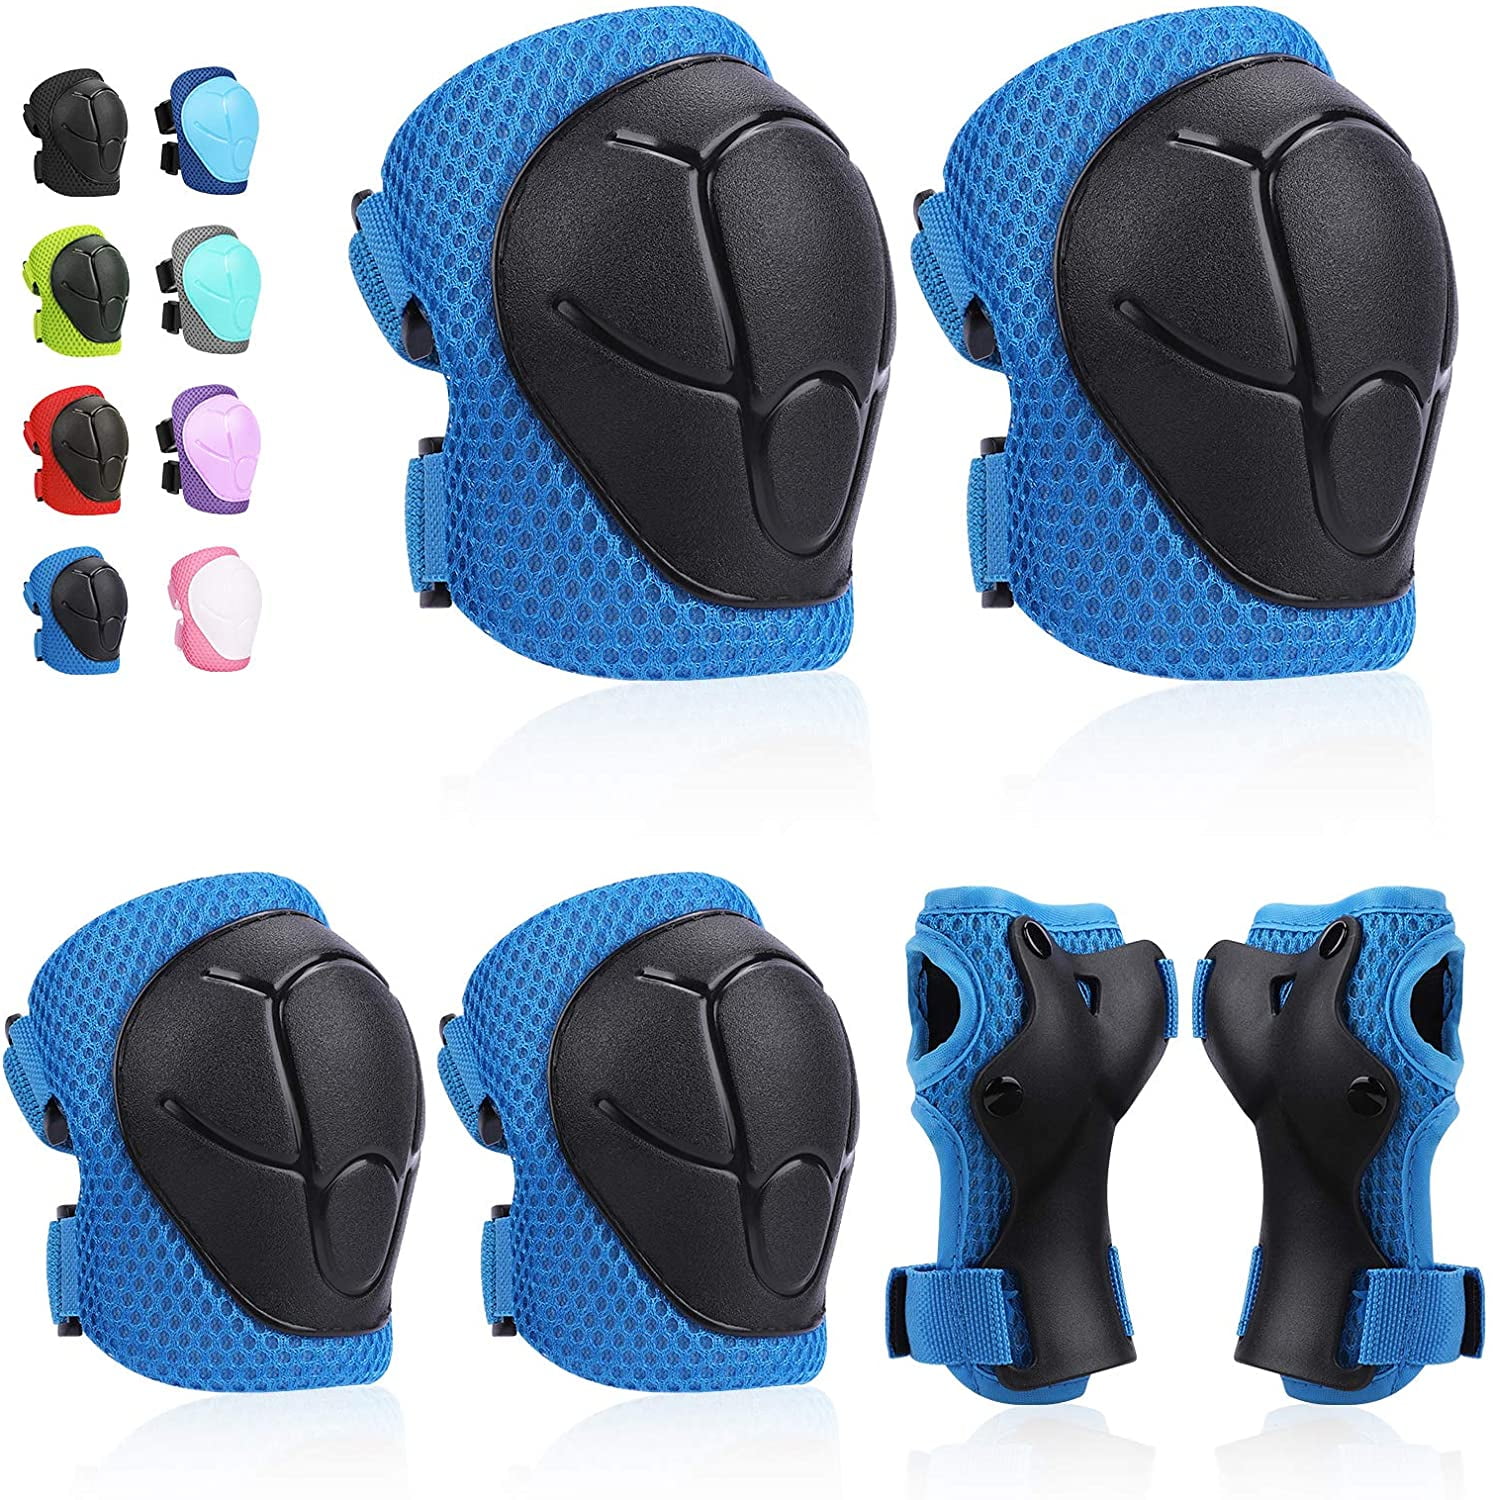 Kids/Youth Knee Pad Elbow Wrist Pads Guards Protective Gear Set for child Roller Skates Cycling BMX Bike Skateboard Inline Skatings Scooter Riding outdoor activities And Other Extreme Sports 